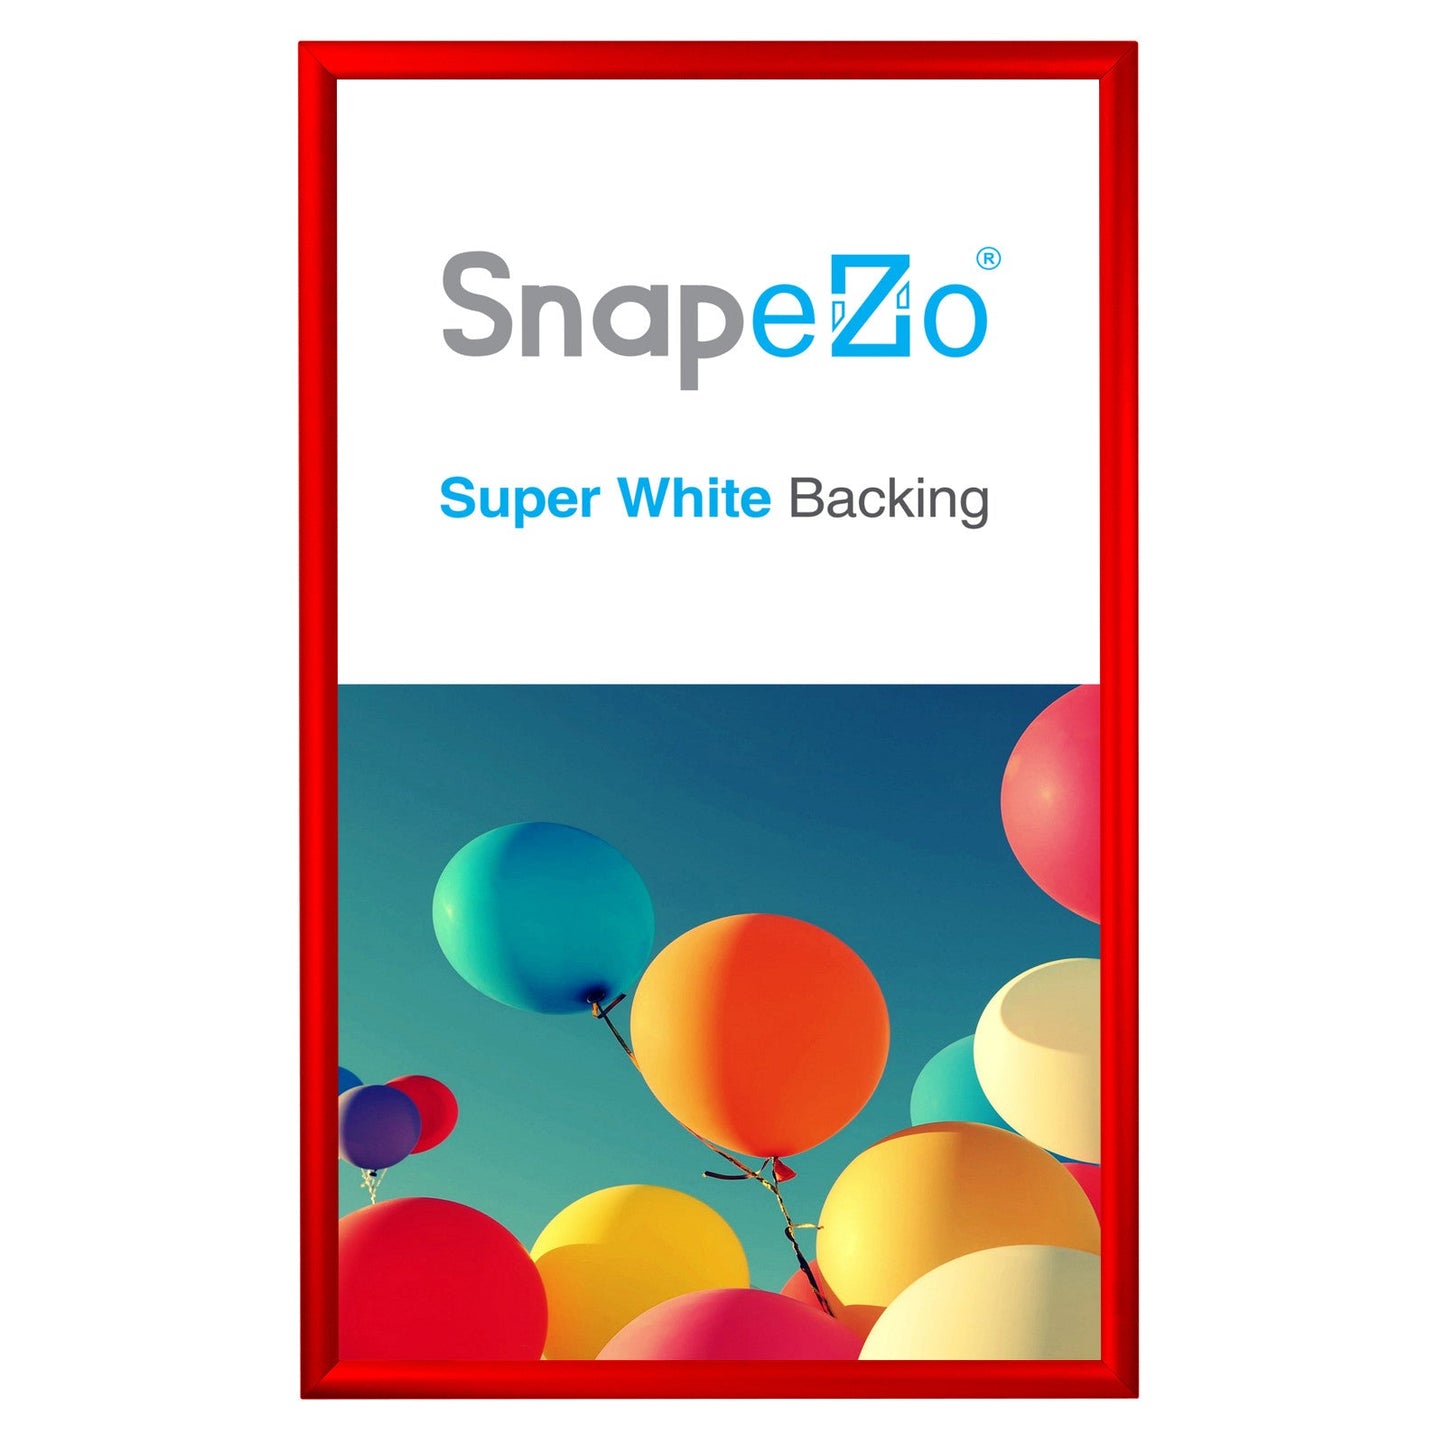 20x34 Red SnapeZo® Snap Frame - 1.2" Profile